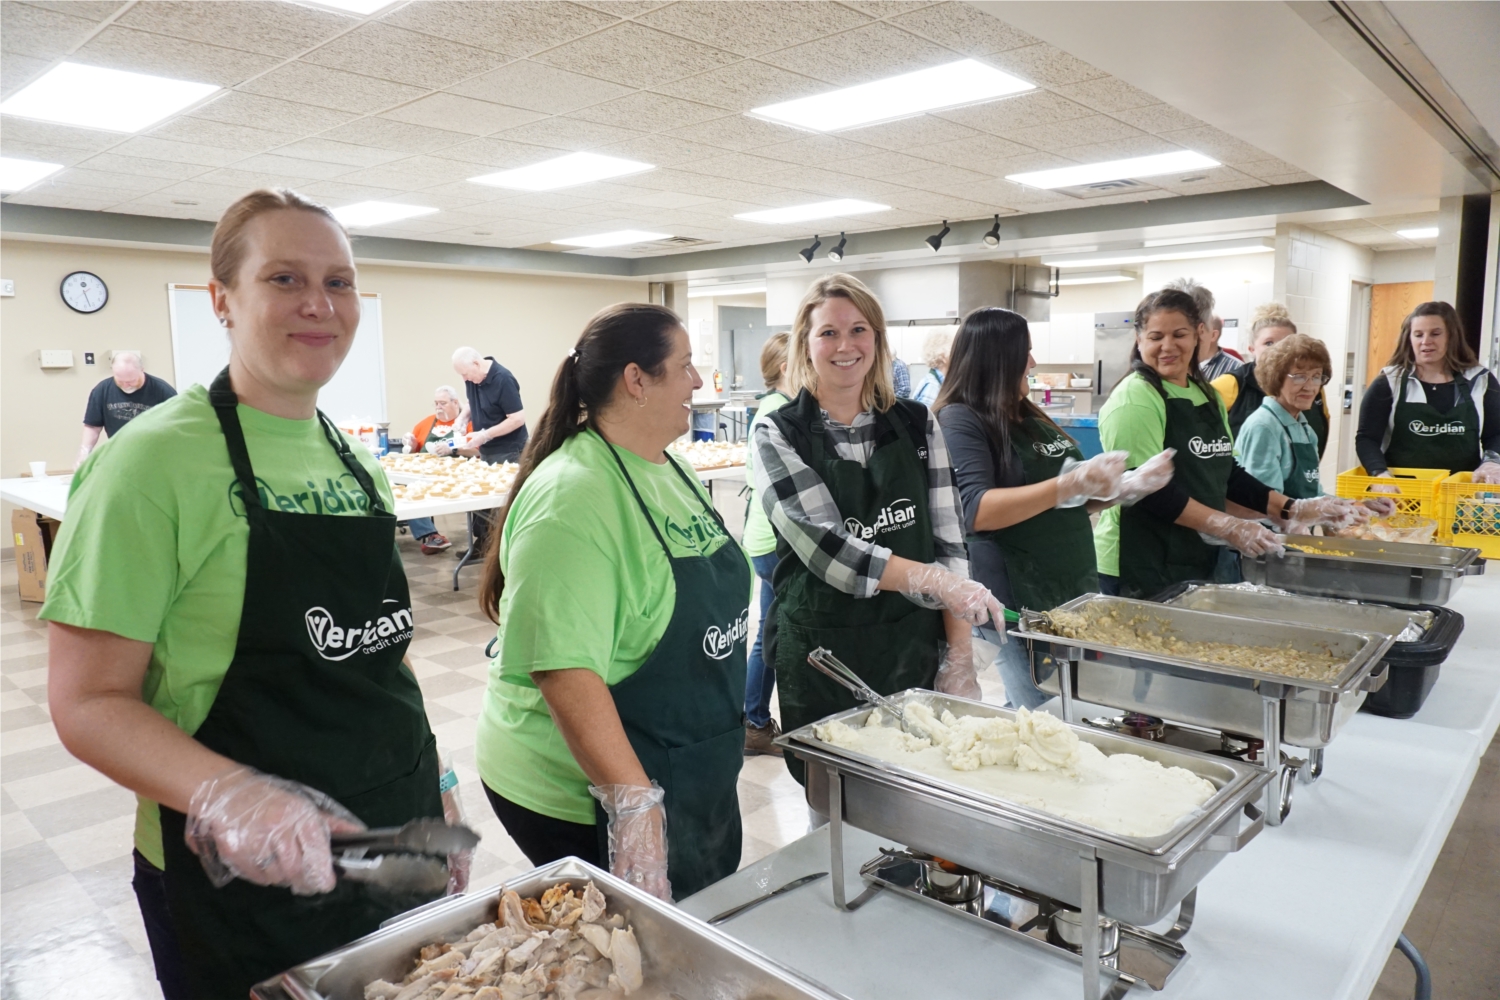 Veridian Credit Union has helped to coordinate a free, community Thanksgiving Dinner in
Waterloo, Iowa each year since 1982. In recent years, the event has drawn 900-1,000
attendees for a warm meal and companionship.